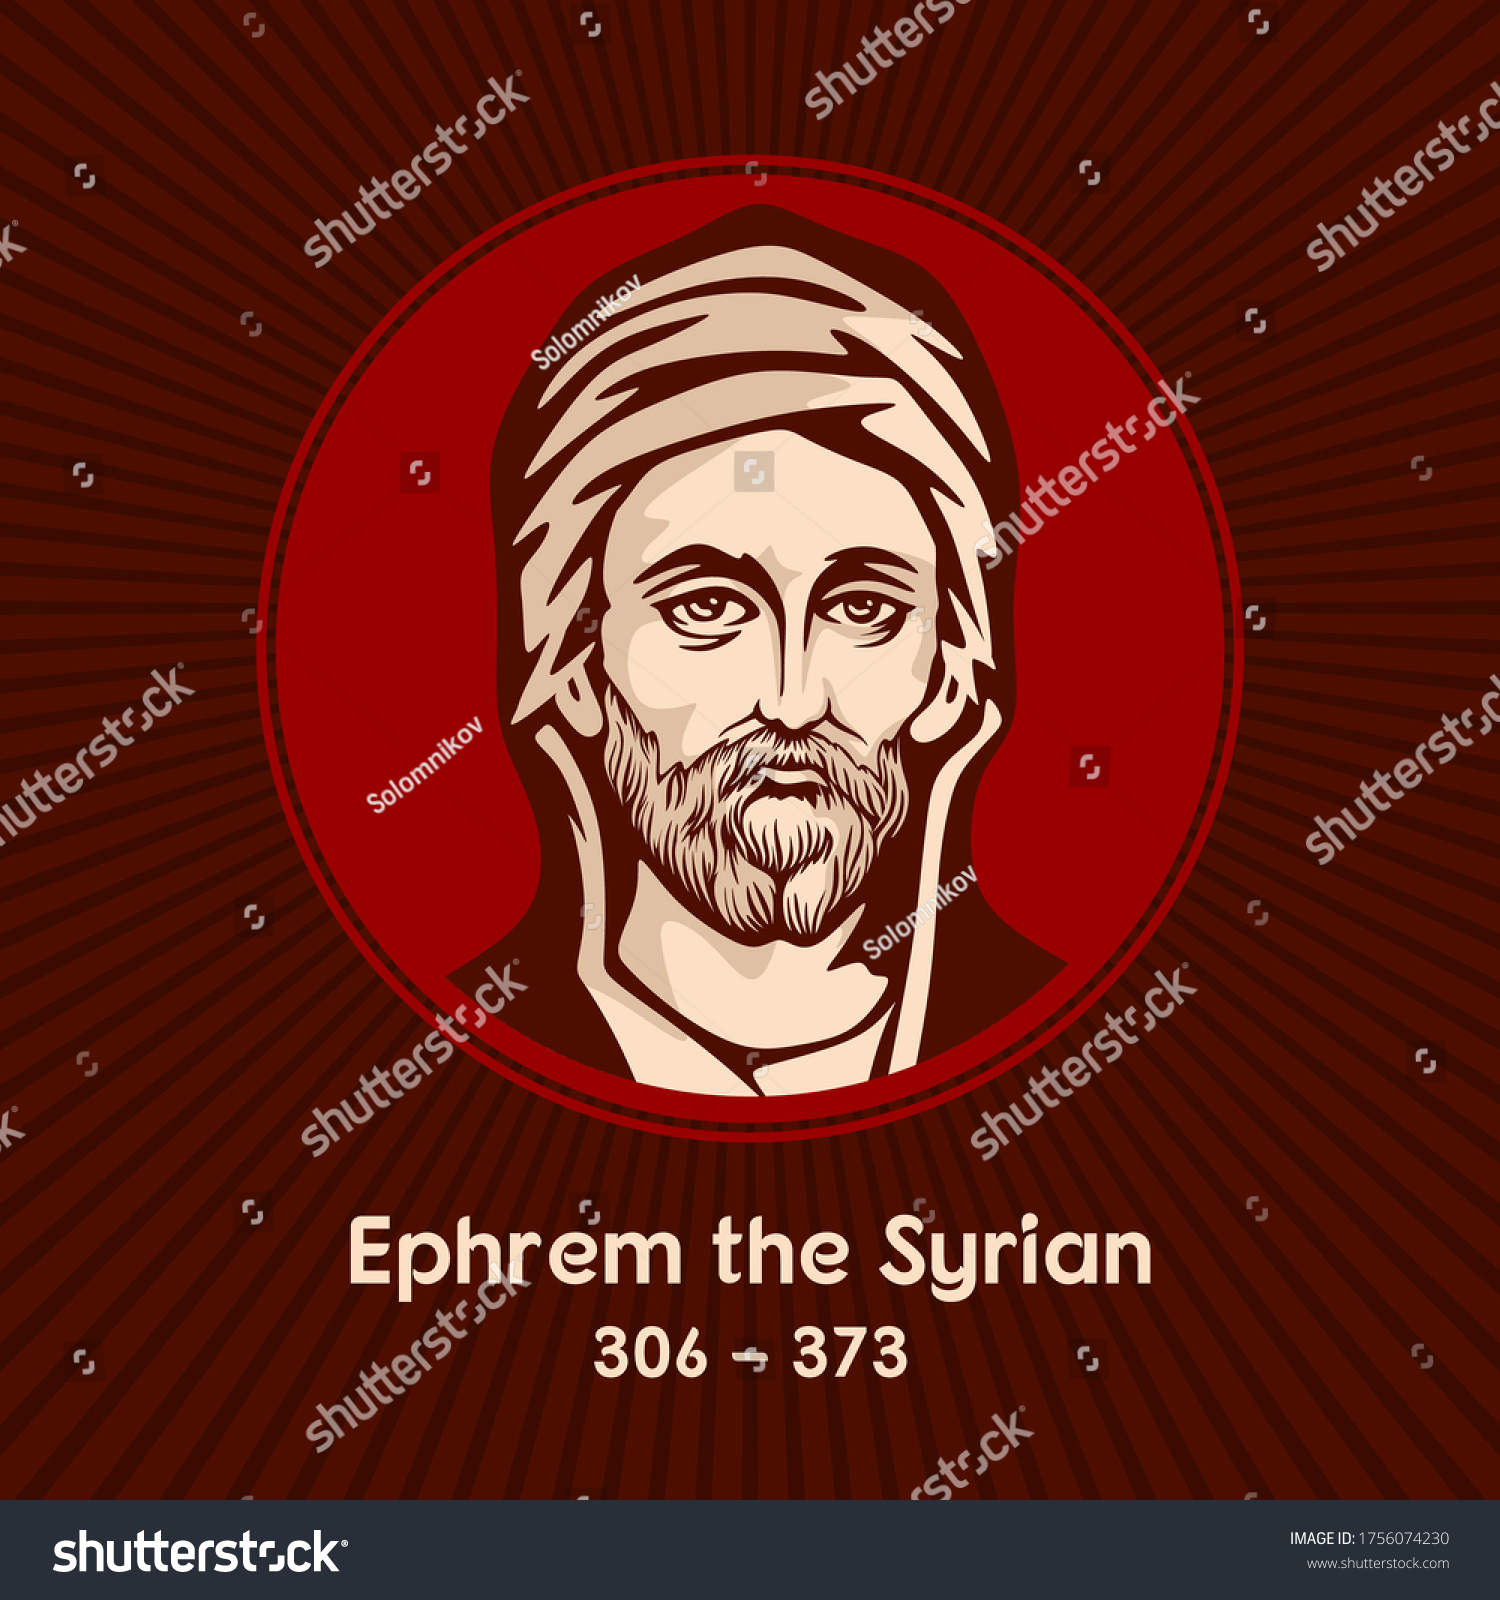 SVG of Ephrem the Syrian (306-373), also known as Saint Ephraem, was a Syriac Christian deacon and a prolific Syriac-language hymnographer and theologian of the fourth century. svg